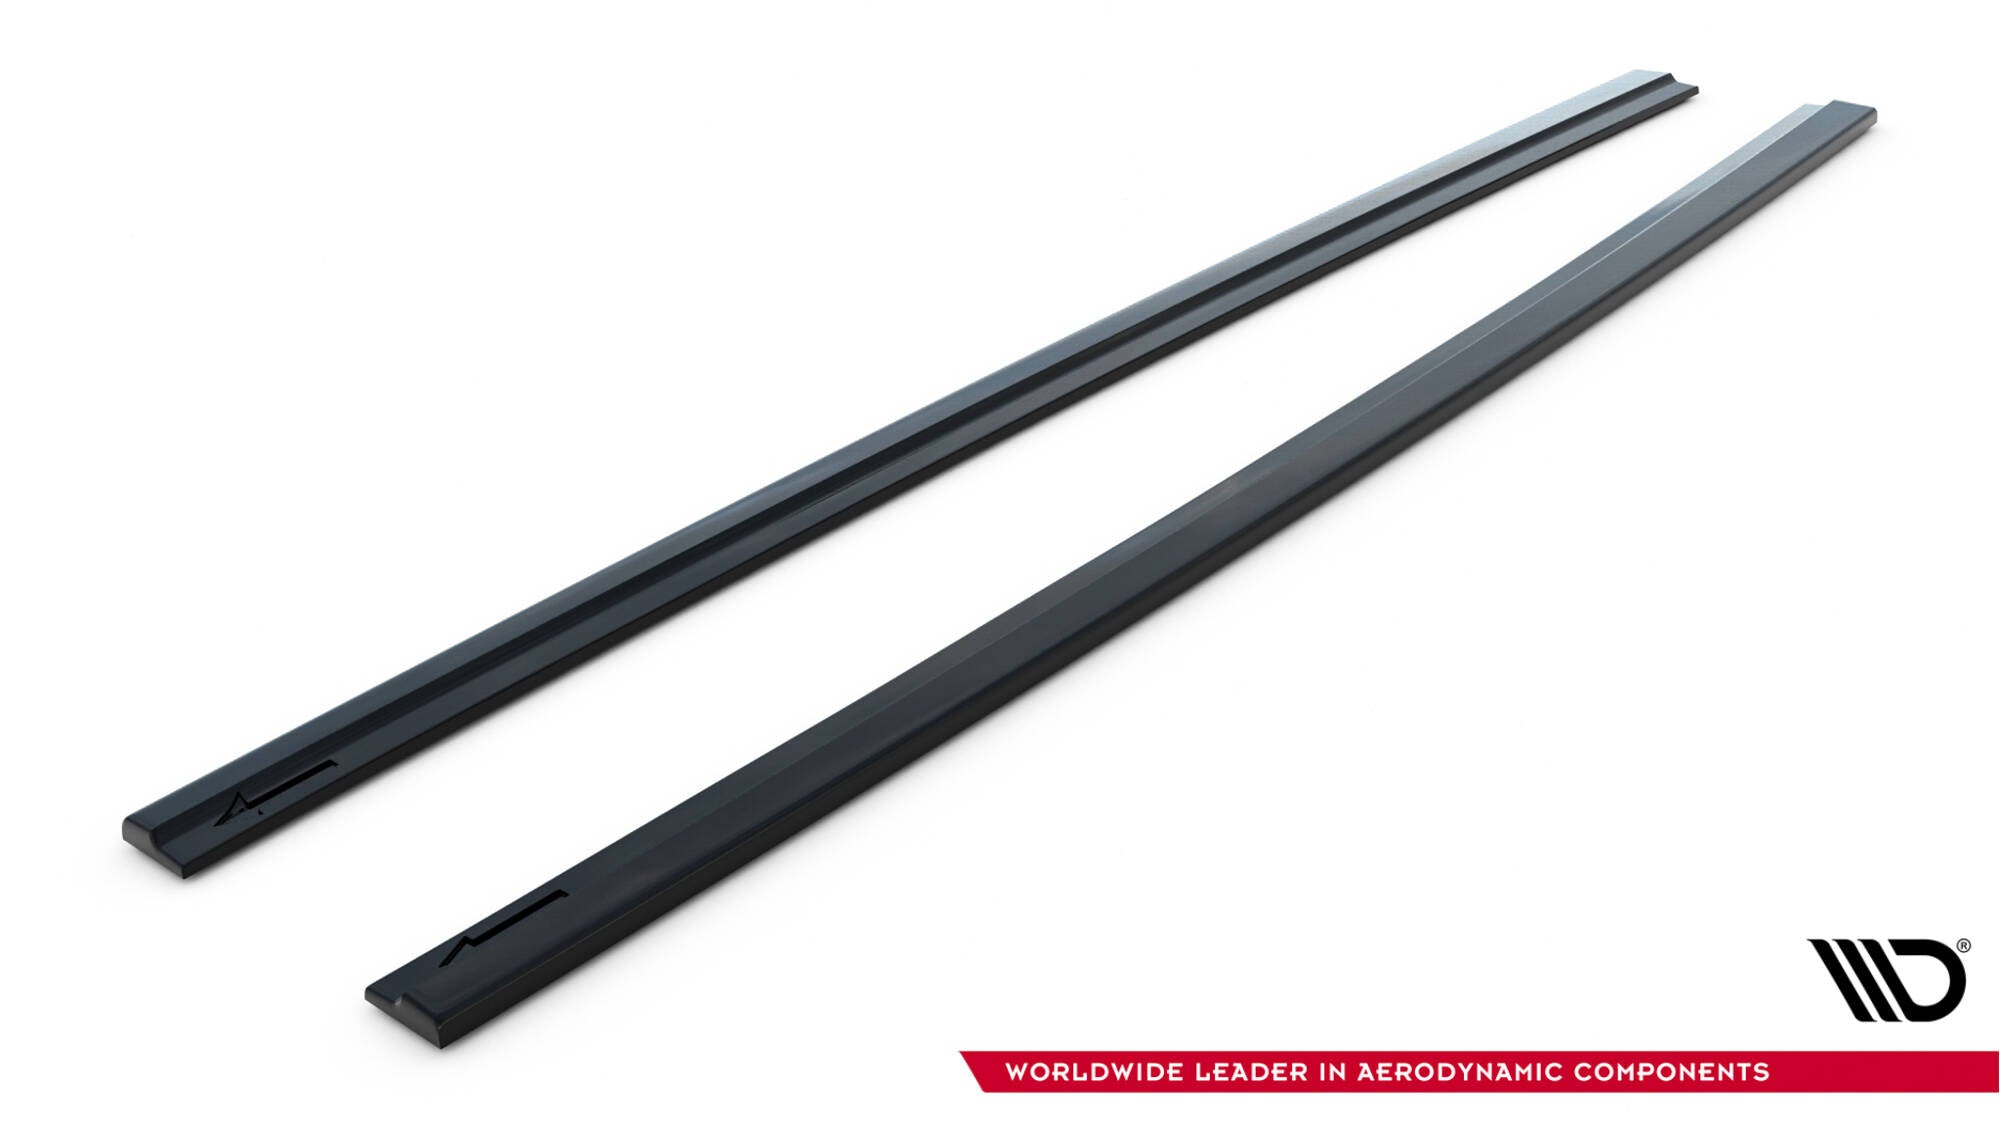 Side Skirts Diffusers Audi S7 / A7 S-Line C7 FL